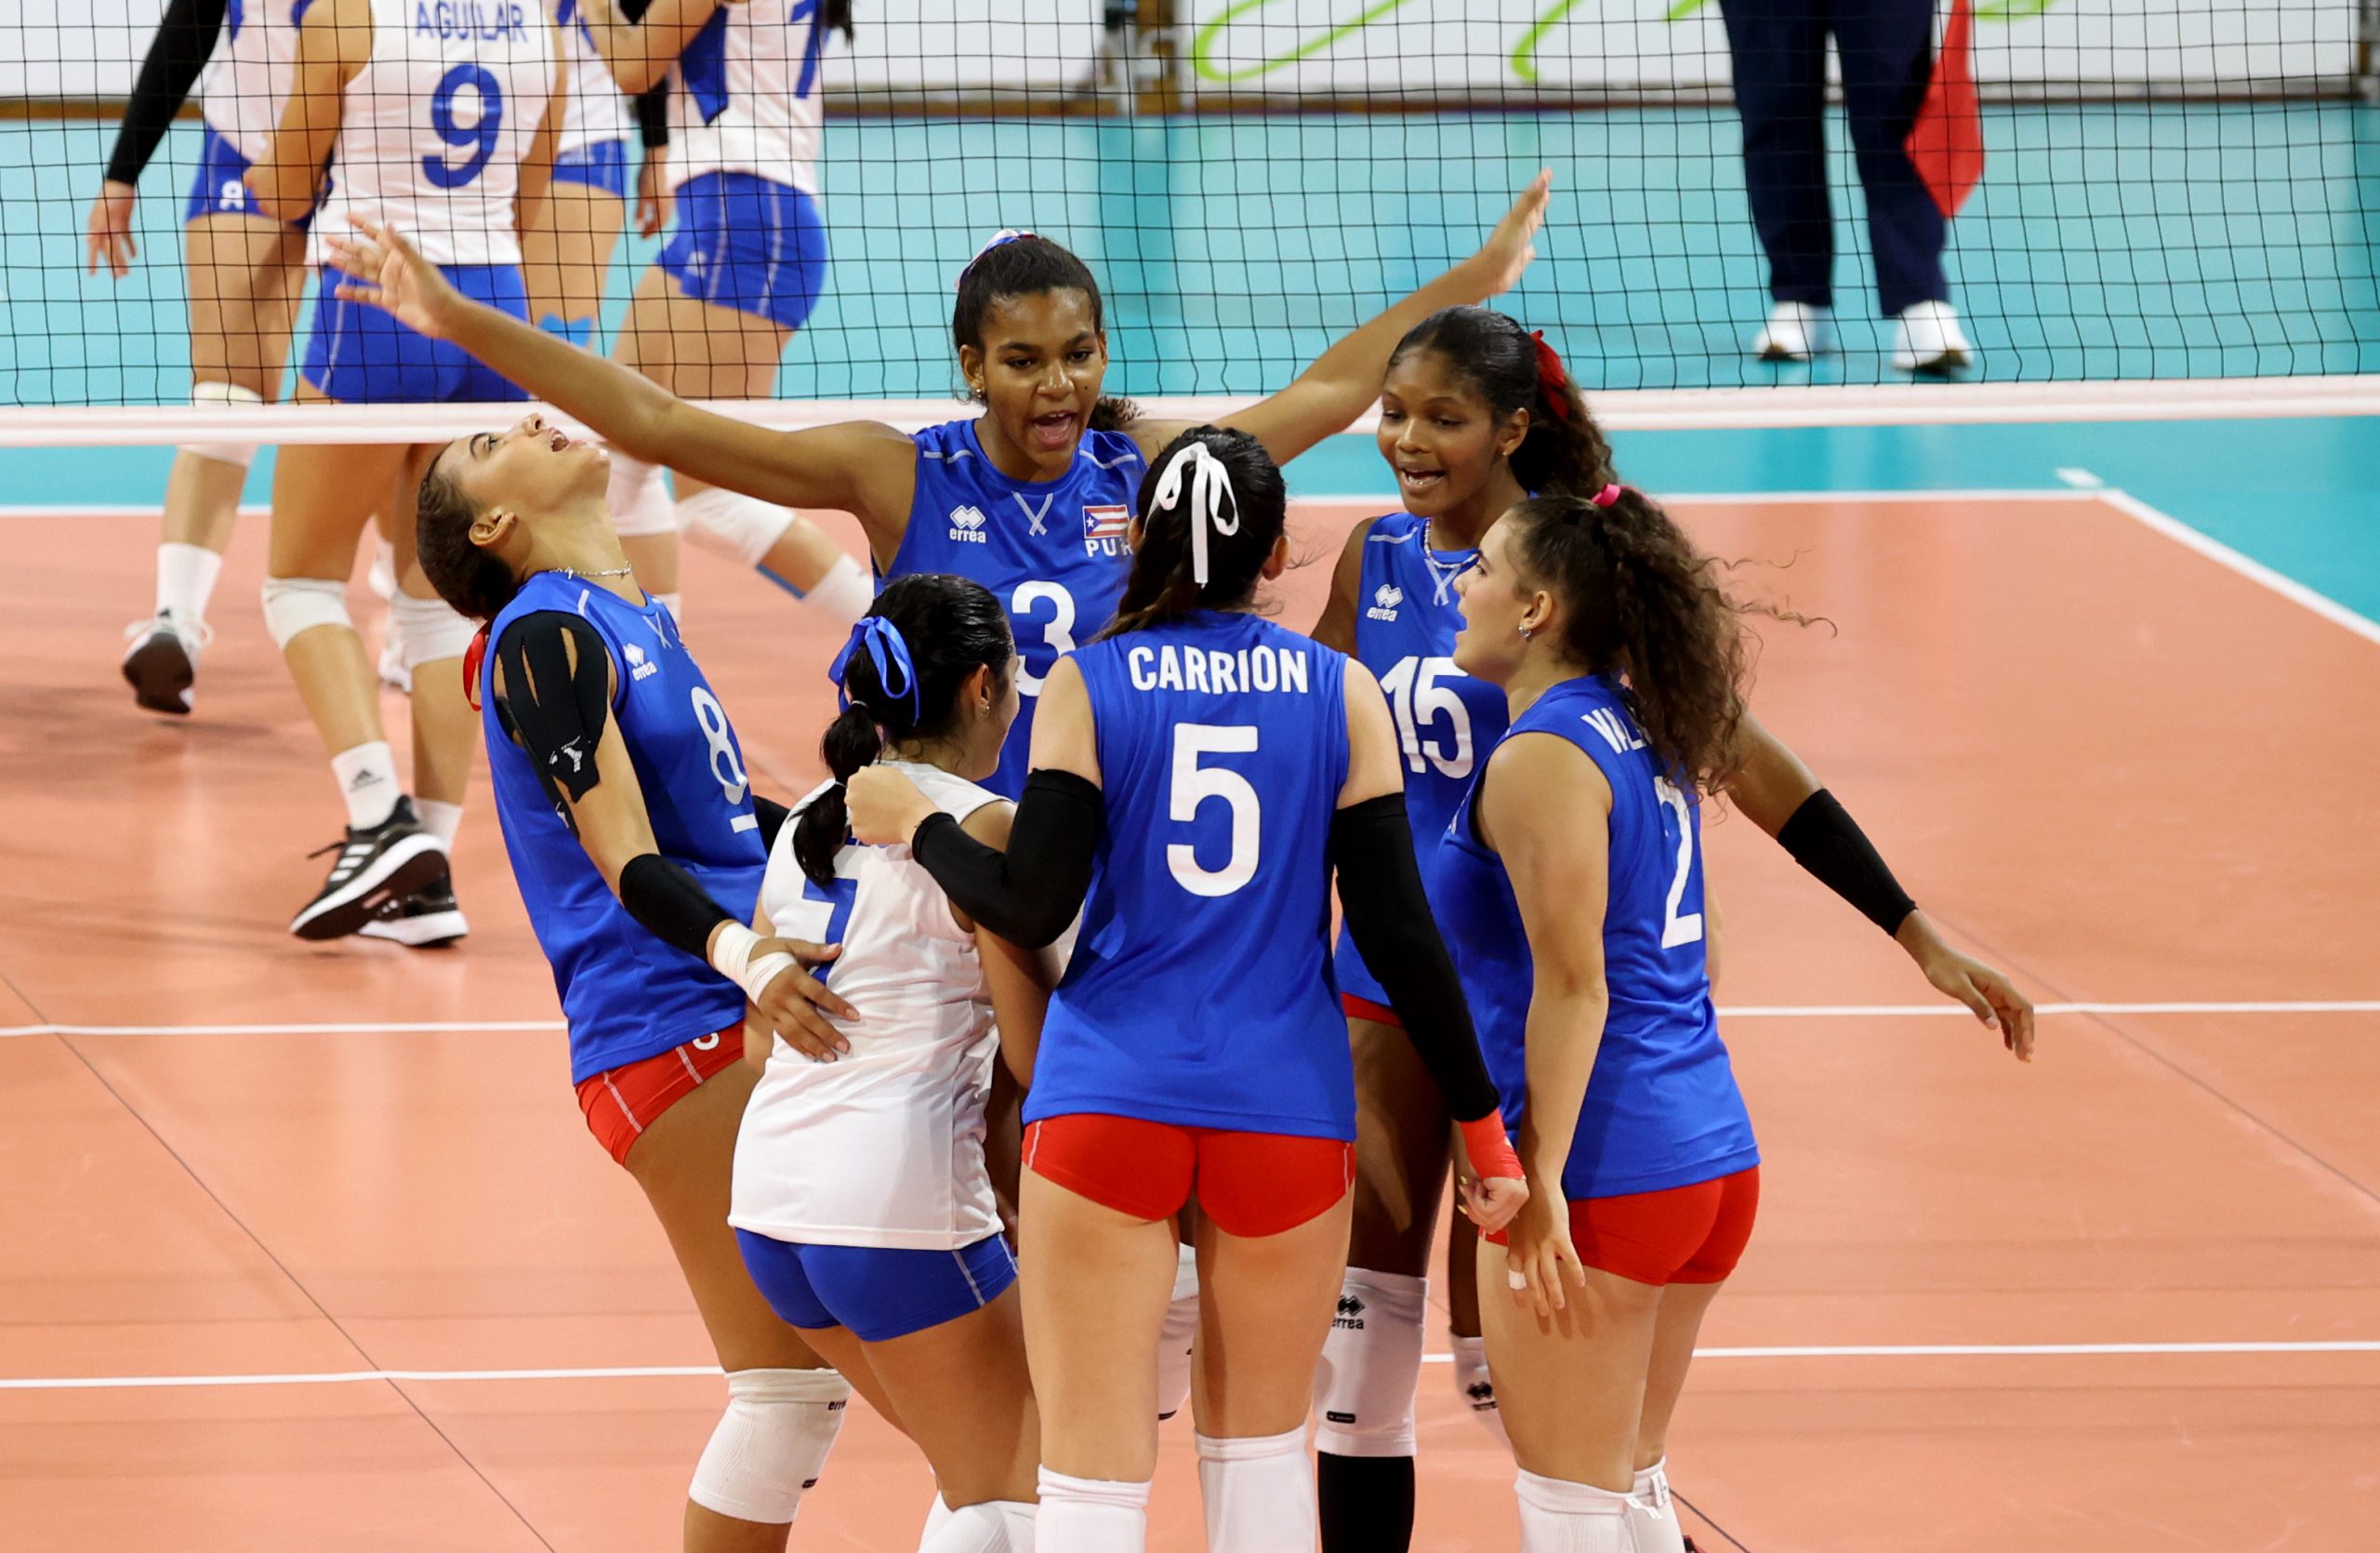 Puerto Rico headed to semifinals undefeated